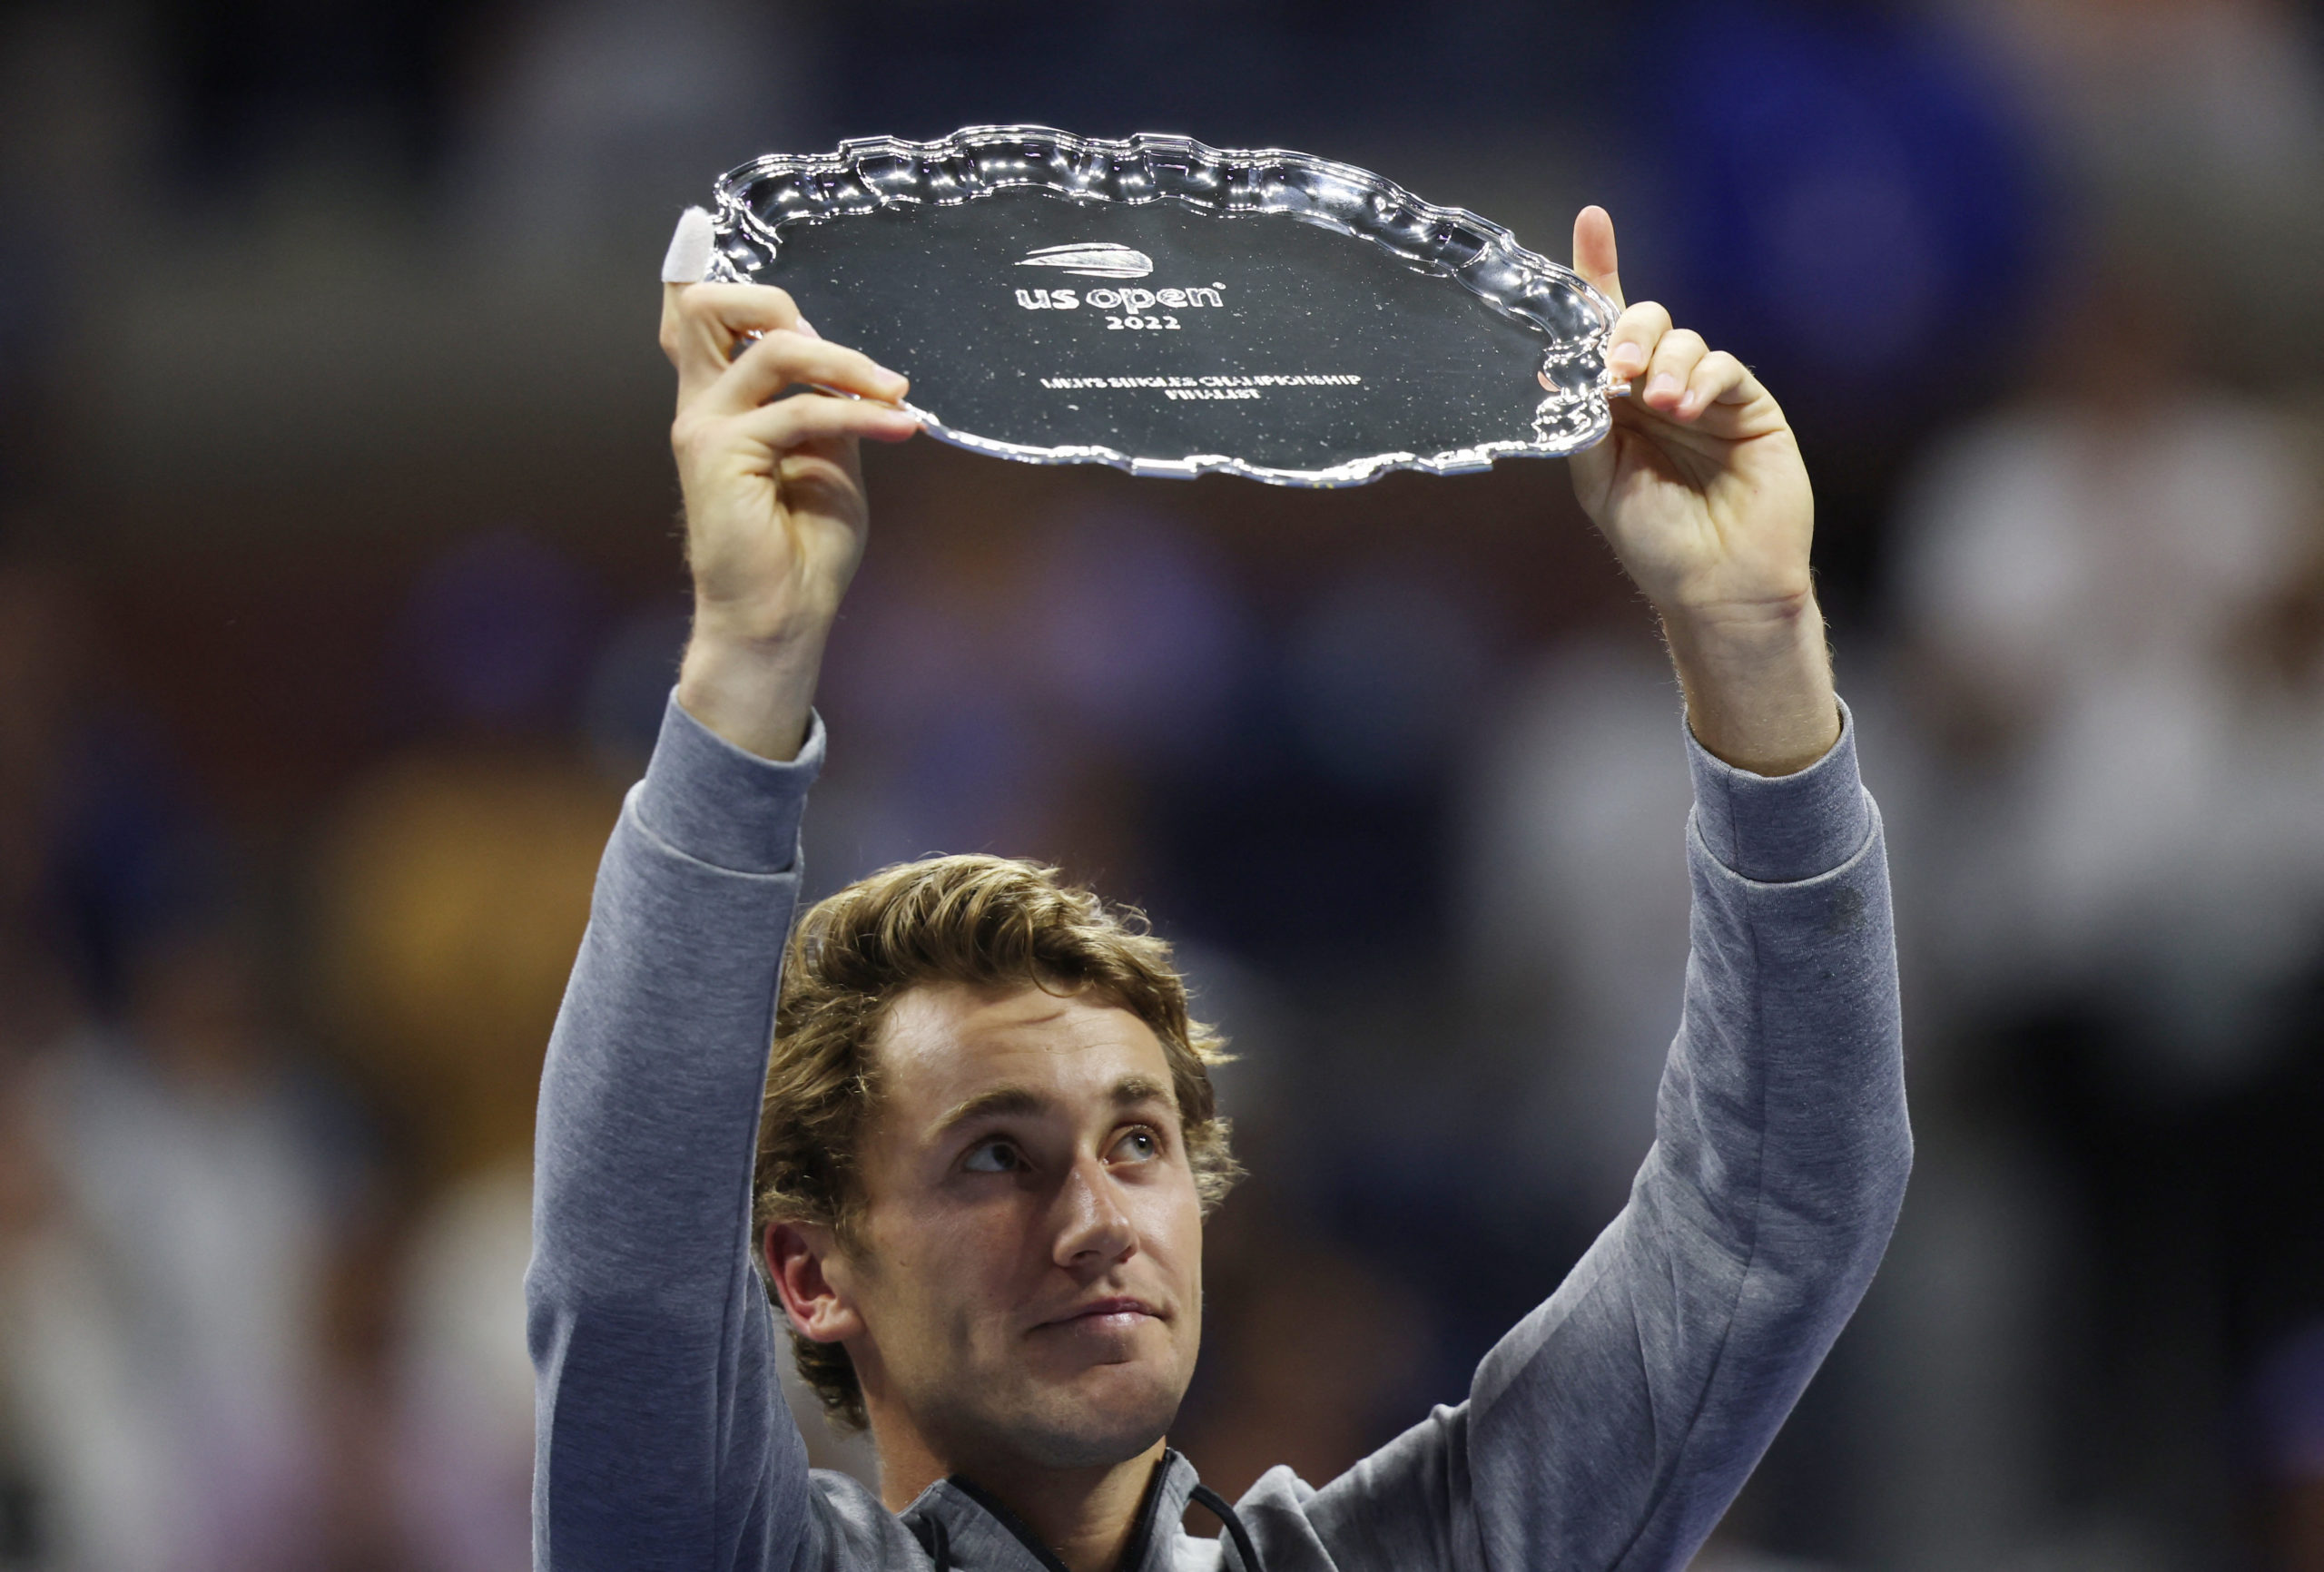 ows, New York, United States - September 11, 2022 Norway's Casper Ruud with his second placed trophy at the U.S. Open